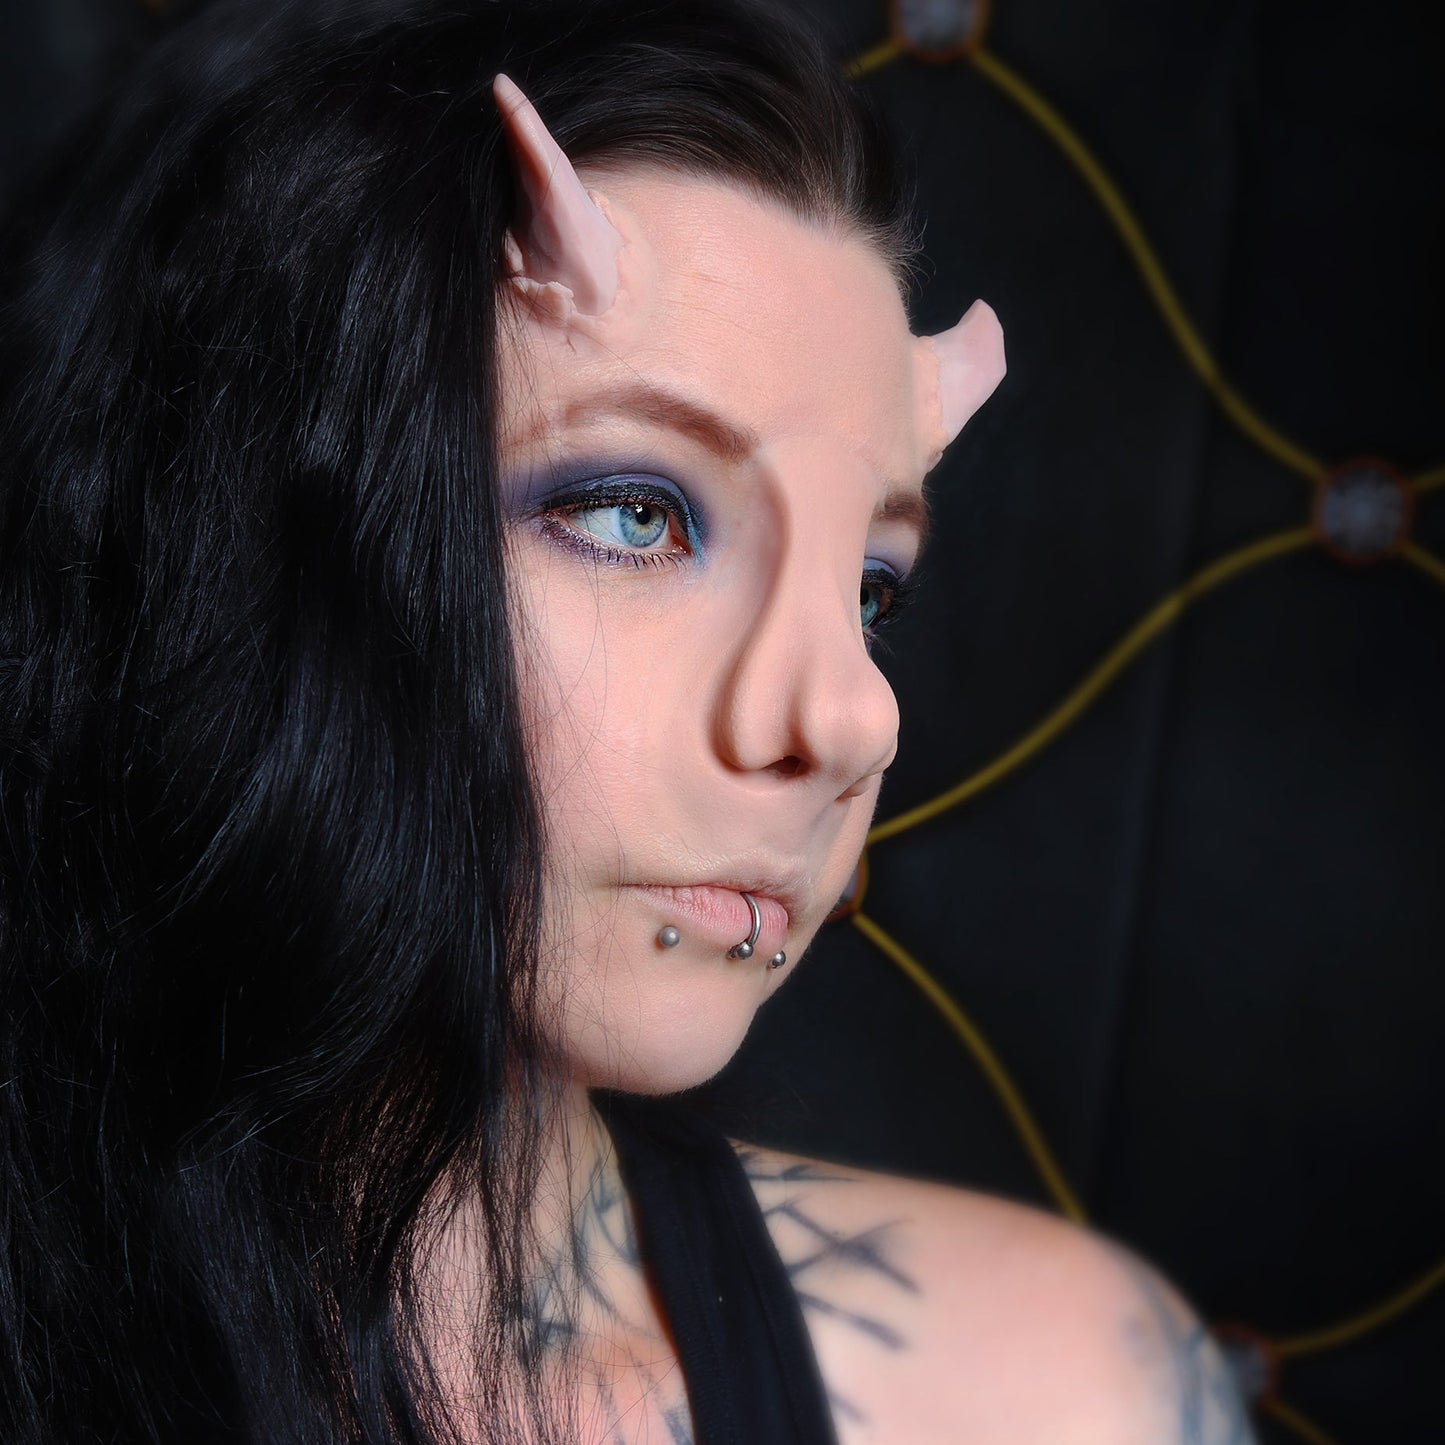 Woman with black hair wearing torn horns and a whelk nose prosthetic